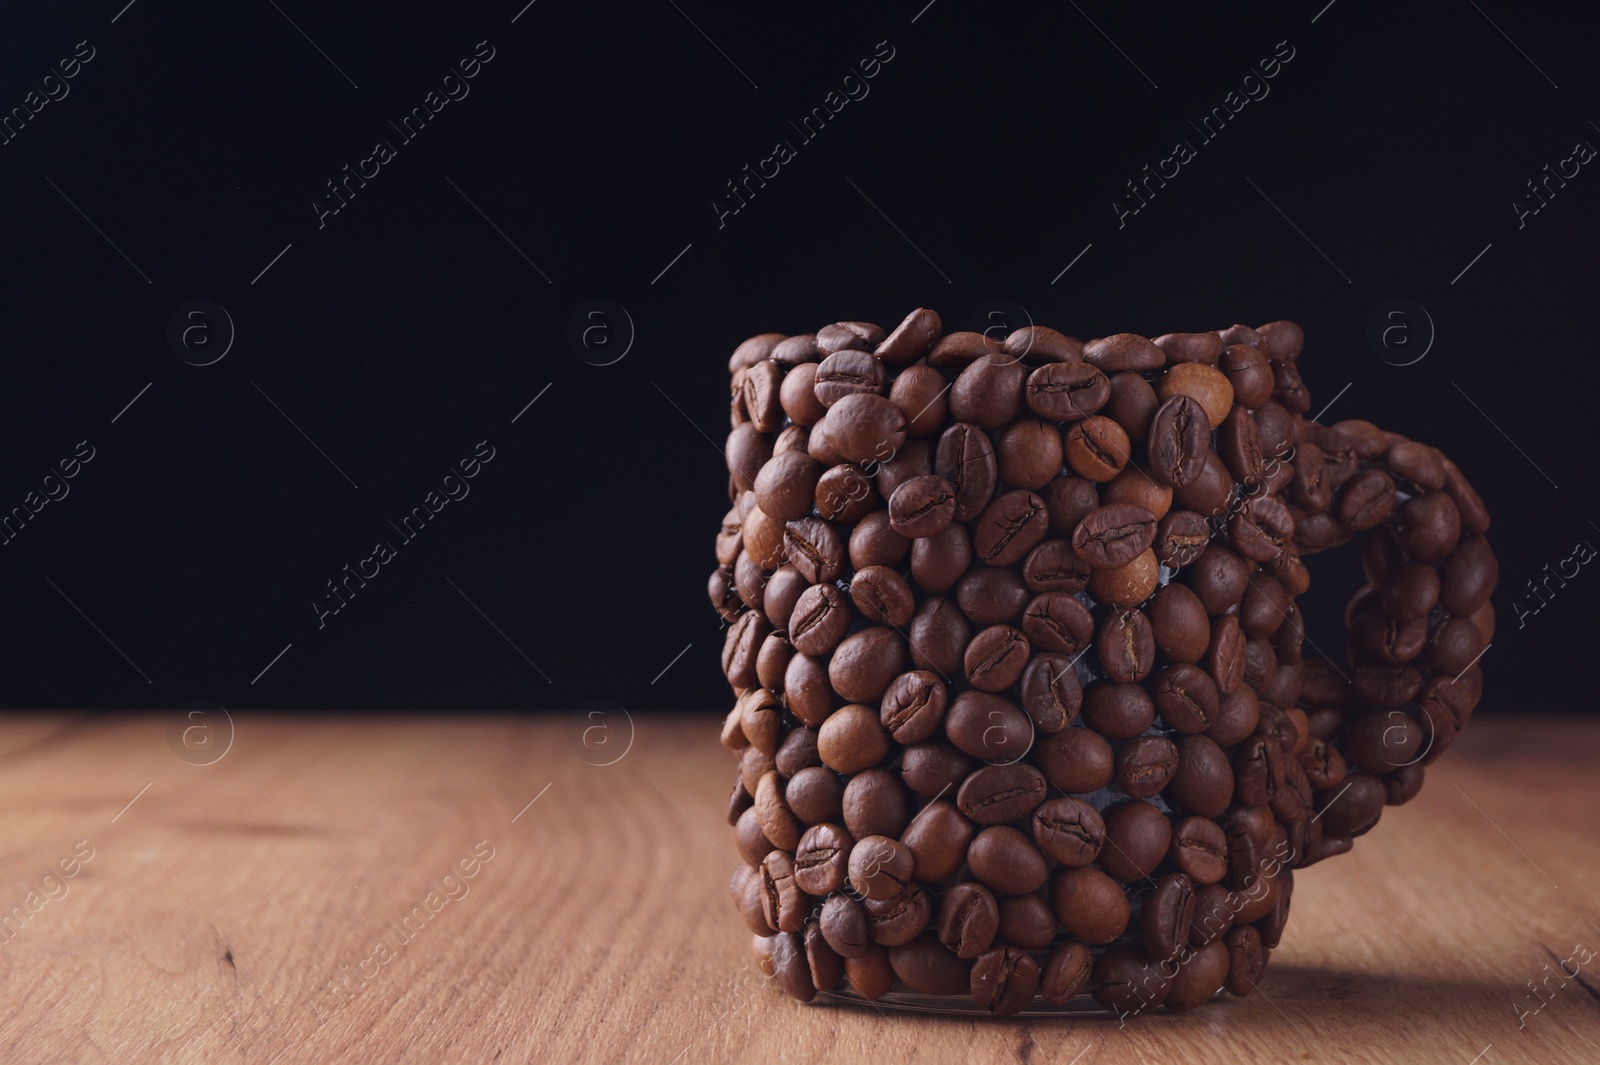 Photo of Cup made of coffee beans on wooden table against black background. Space for text